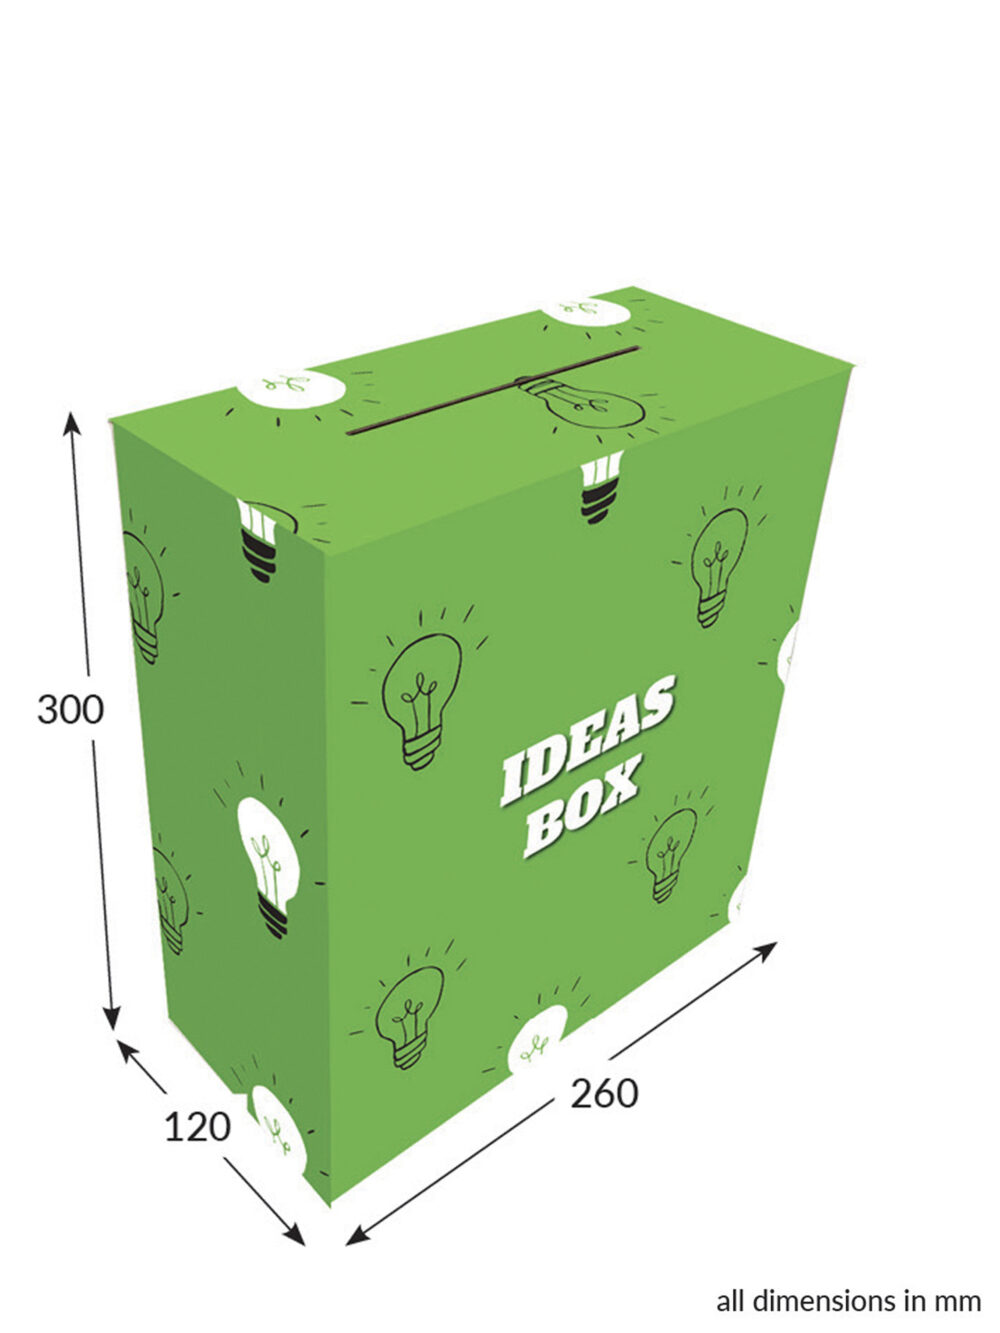 Featured image for “Ballot Box Large - Ideas Box”